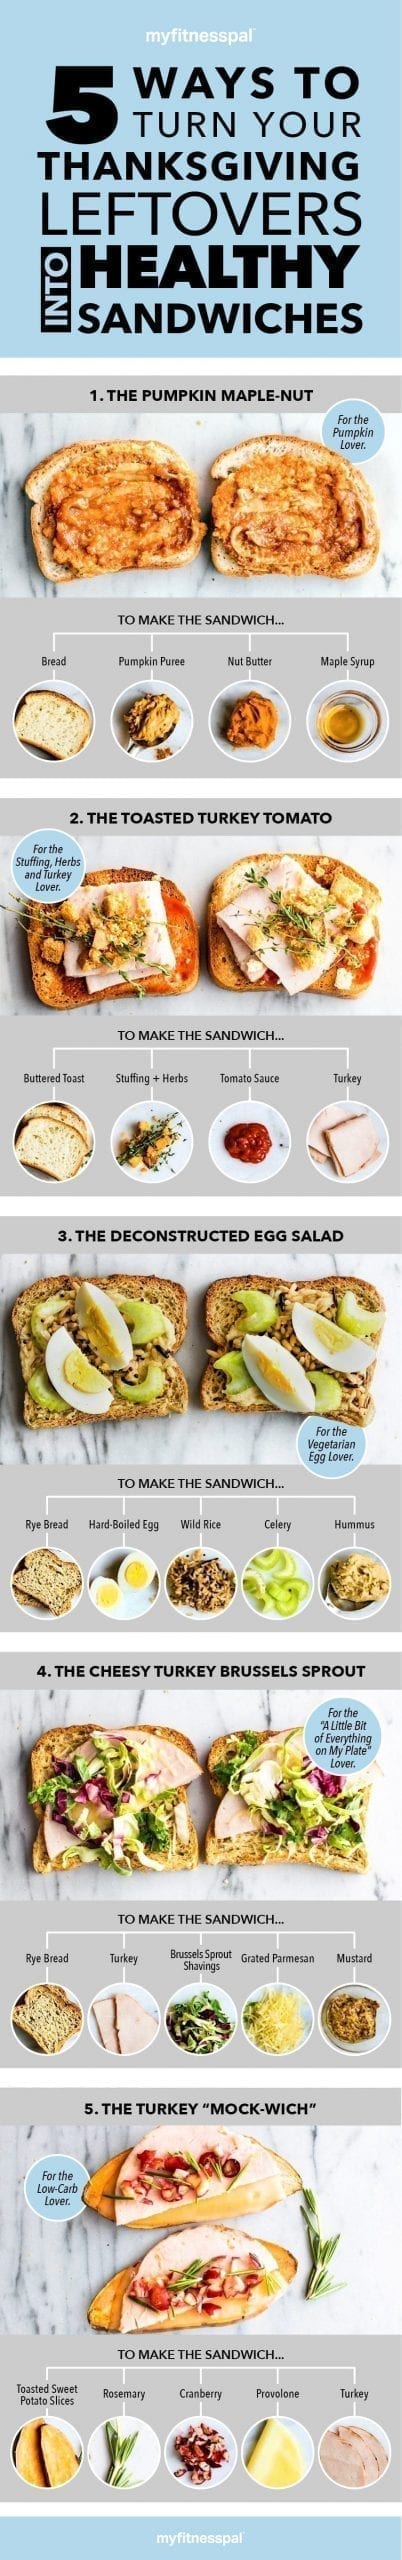 5 Healthier Thanksgiving Leftover Sandwiches [Infographic] | MyFitnessPal